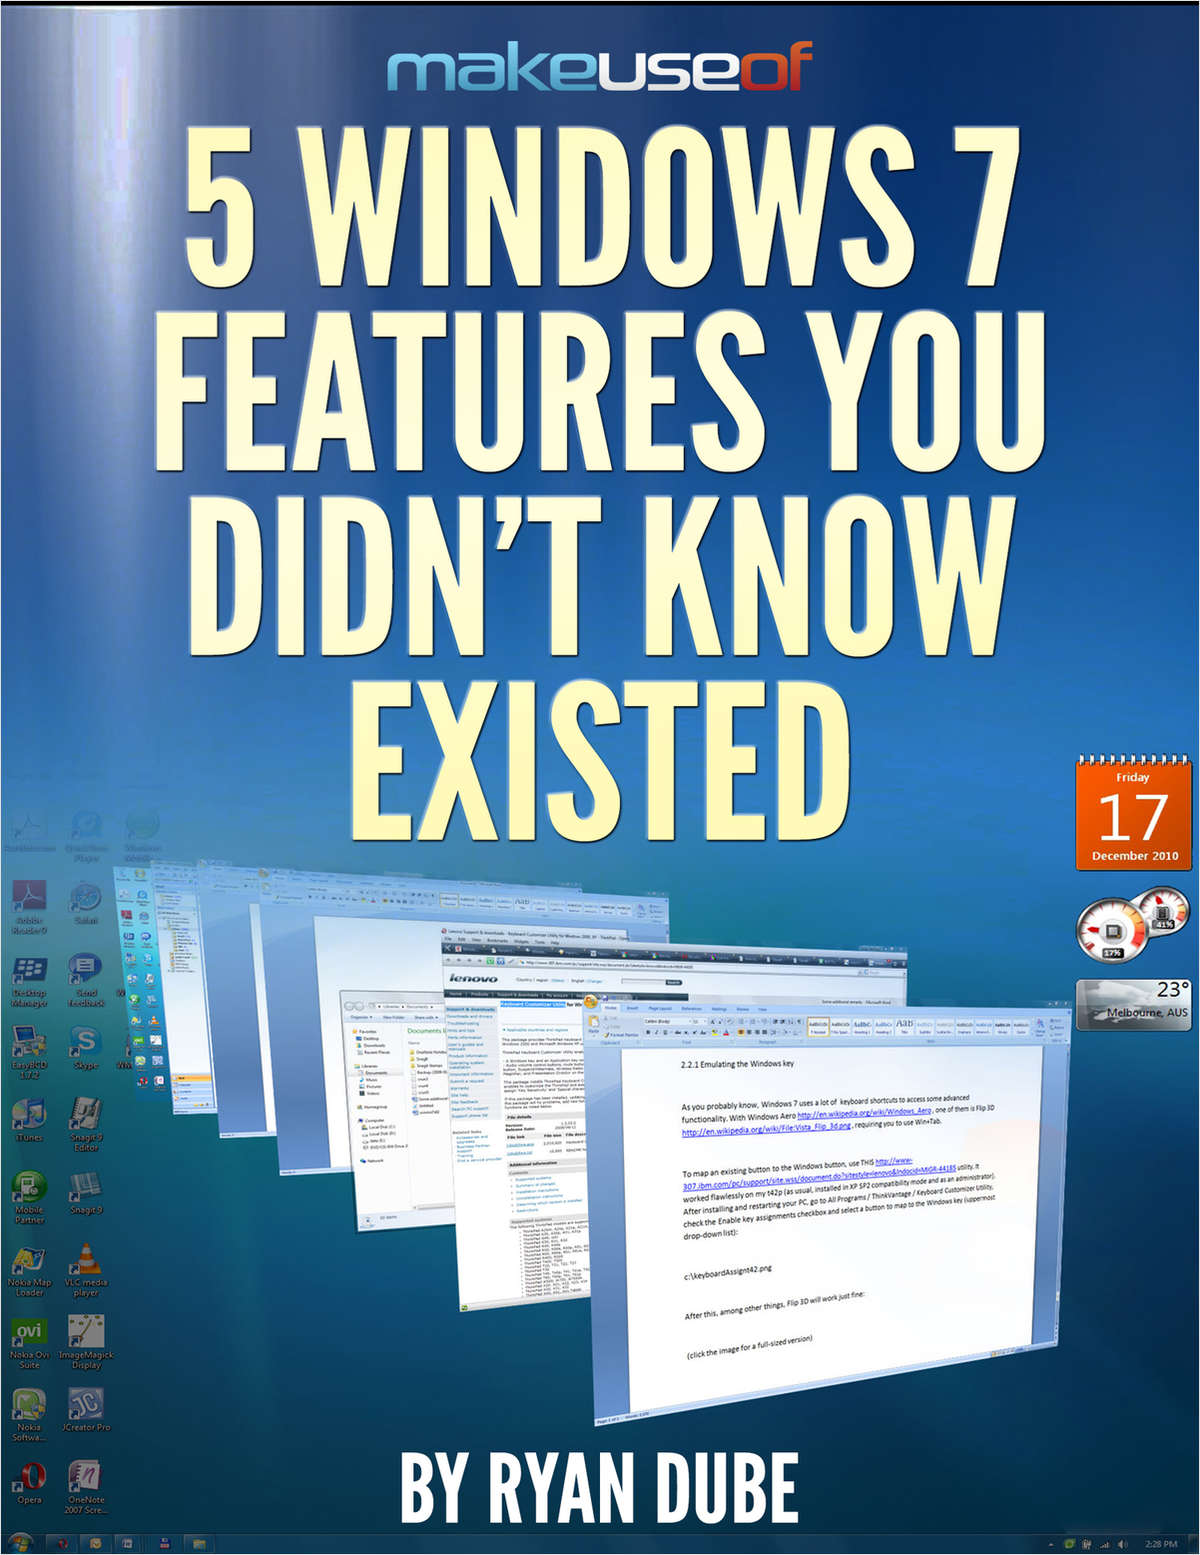 5 Windows 7 Features You Didn't Know Existed